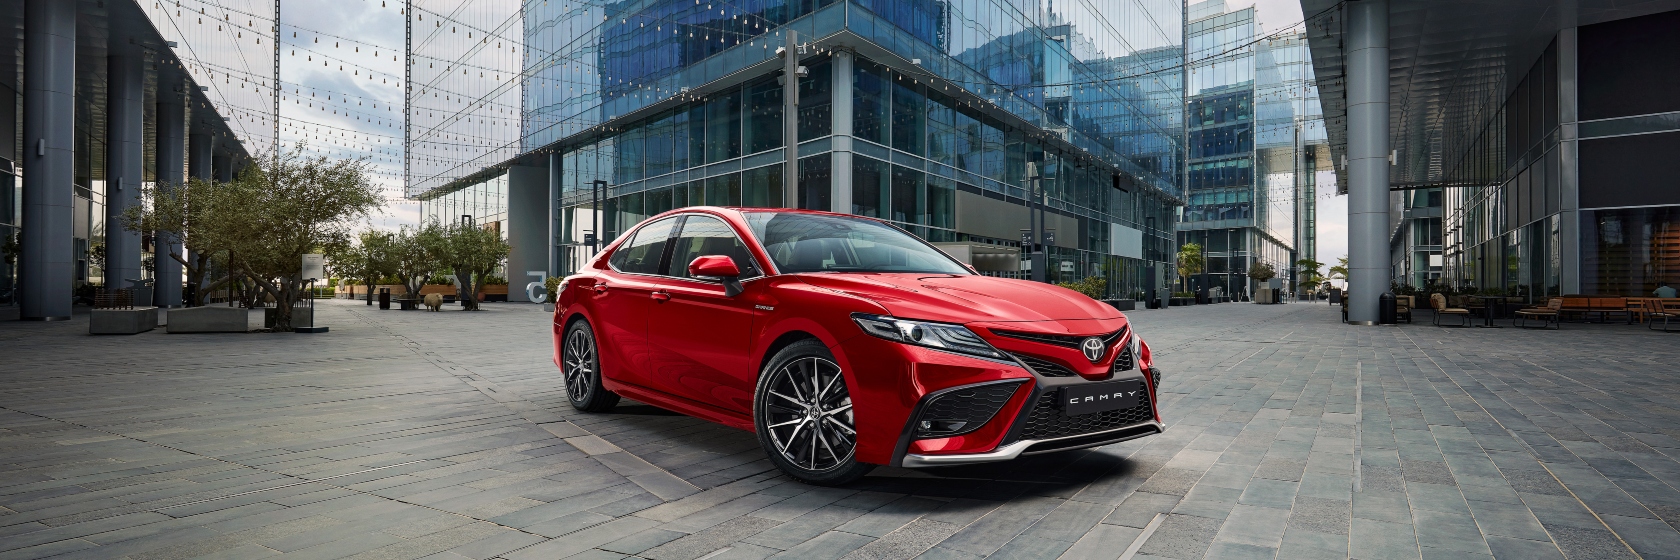 toyota-corolla-vs-toyota-camry-which-one-for-you